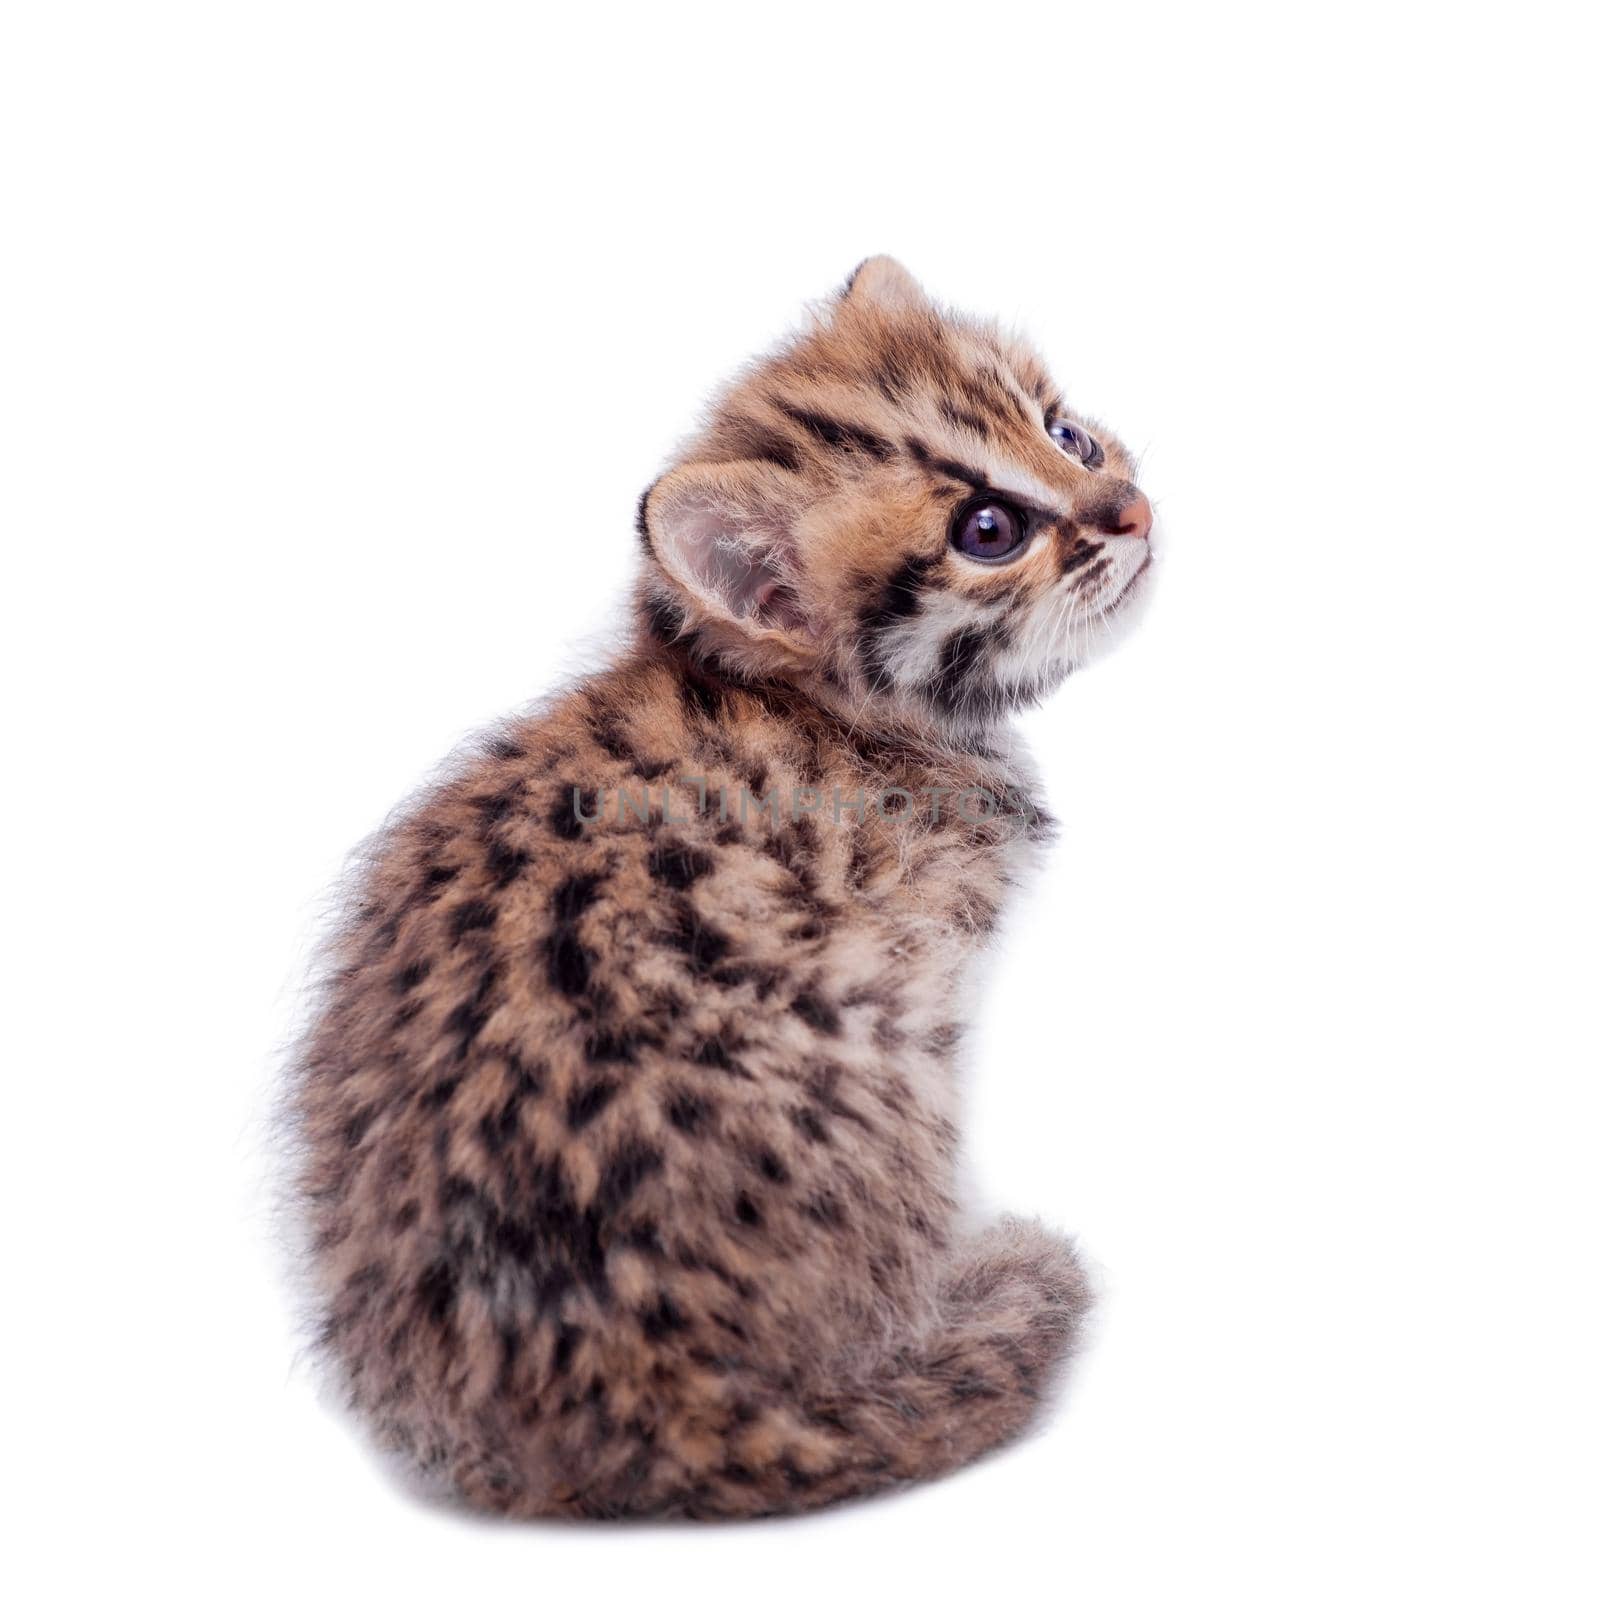 Asian leopard cat, Prionailurus bengalensis, isolated on white